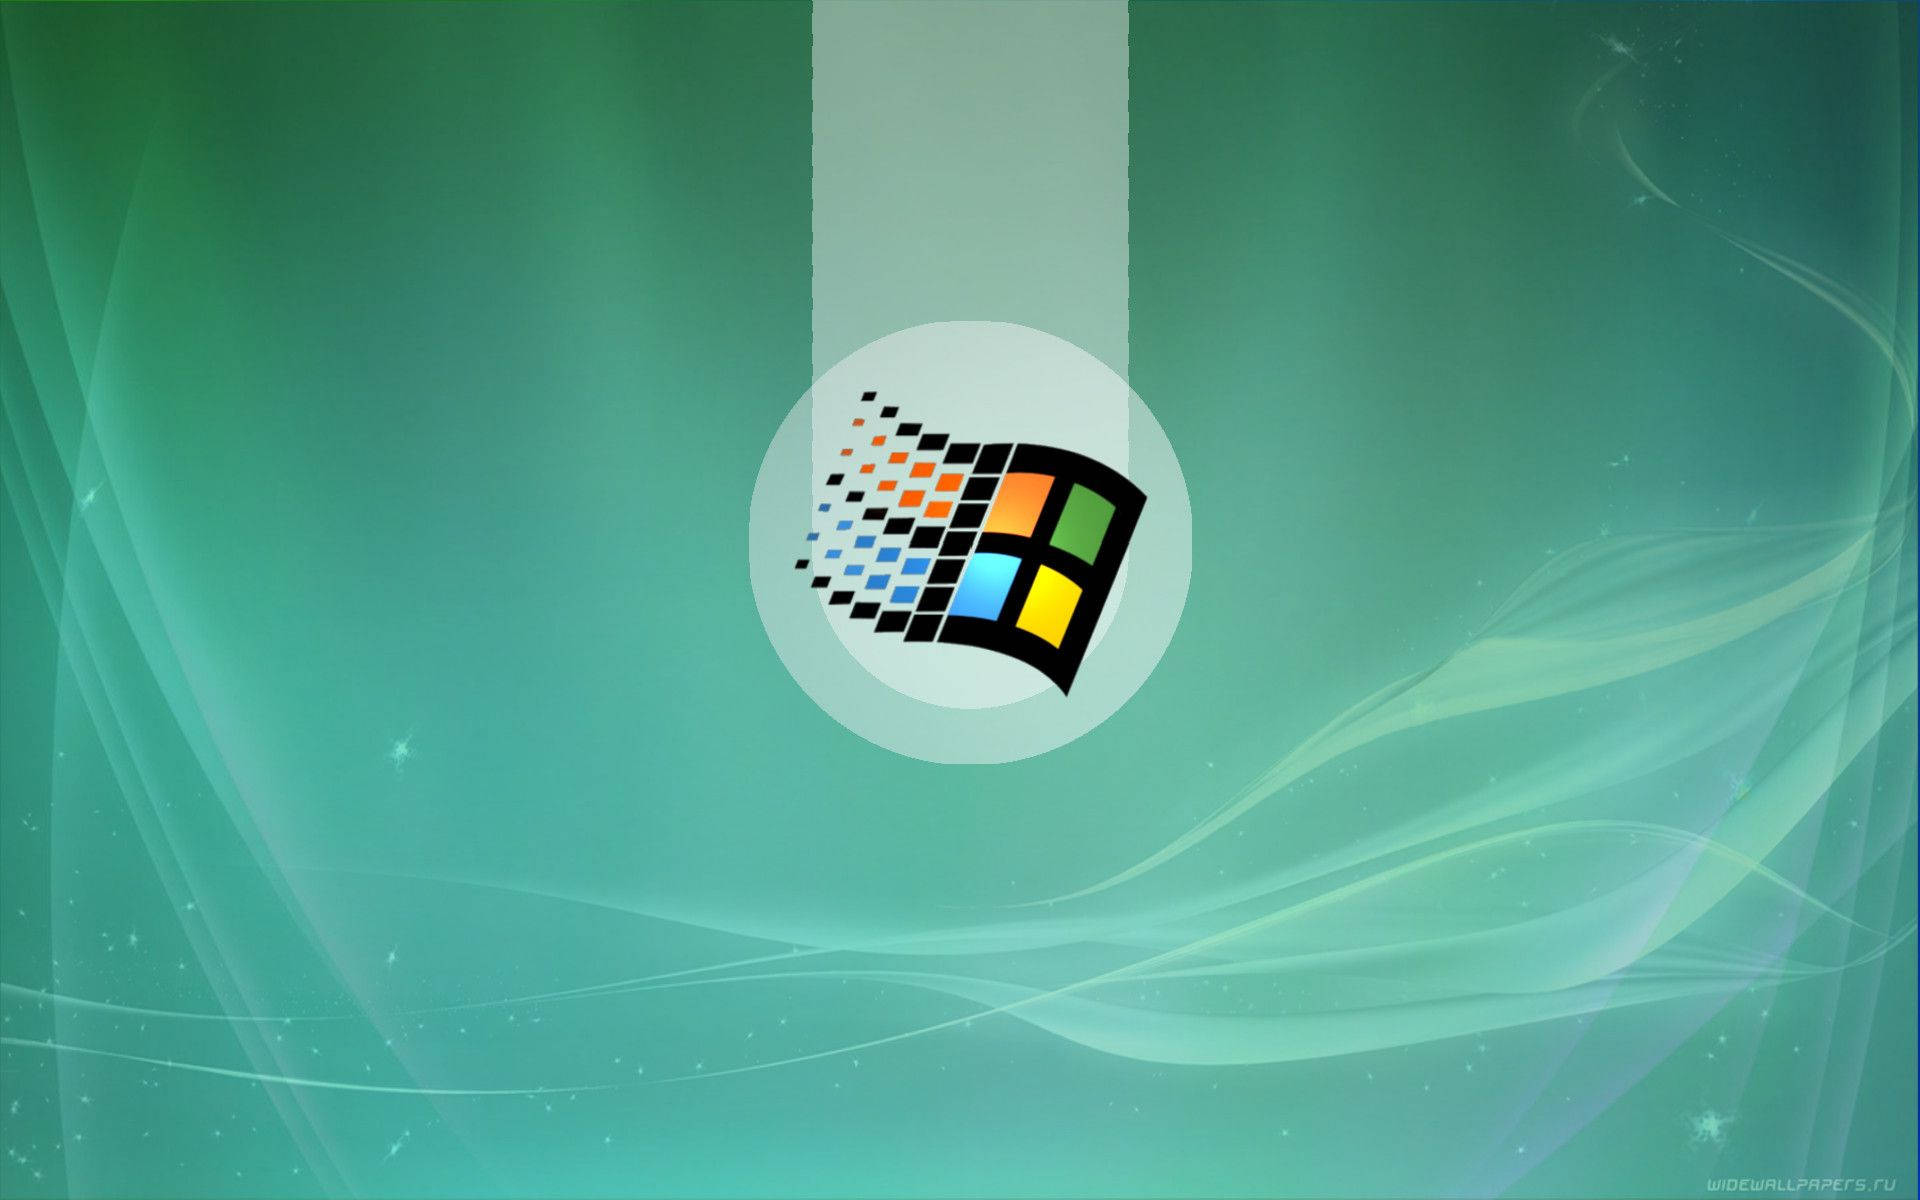 Windows 95 1920X1200 Wallpaper and Background Image